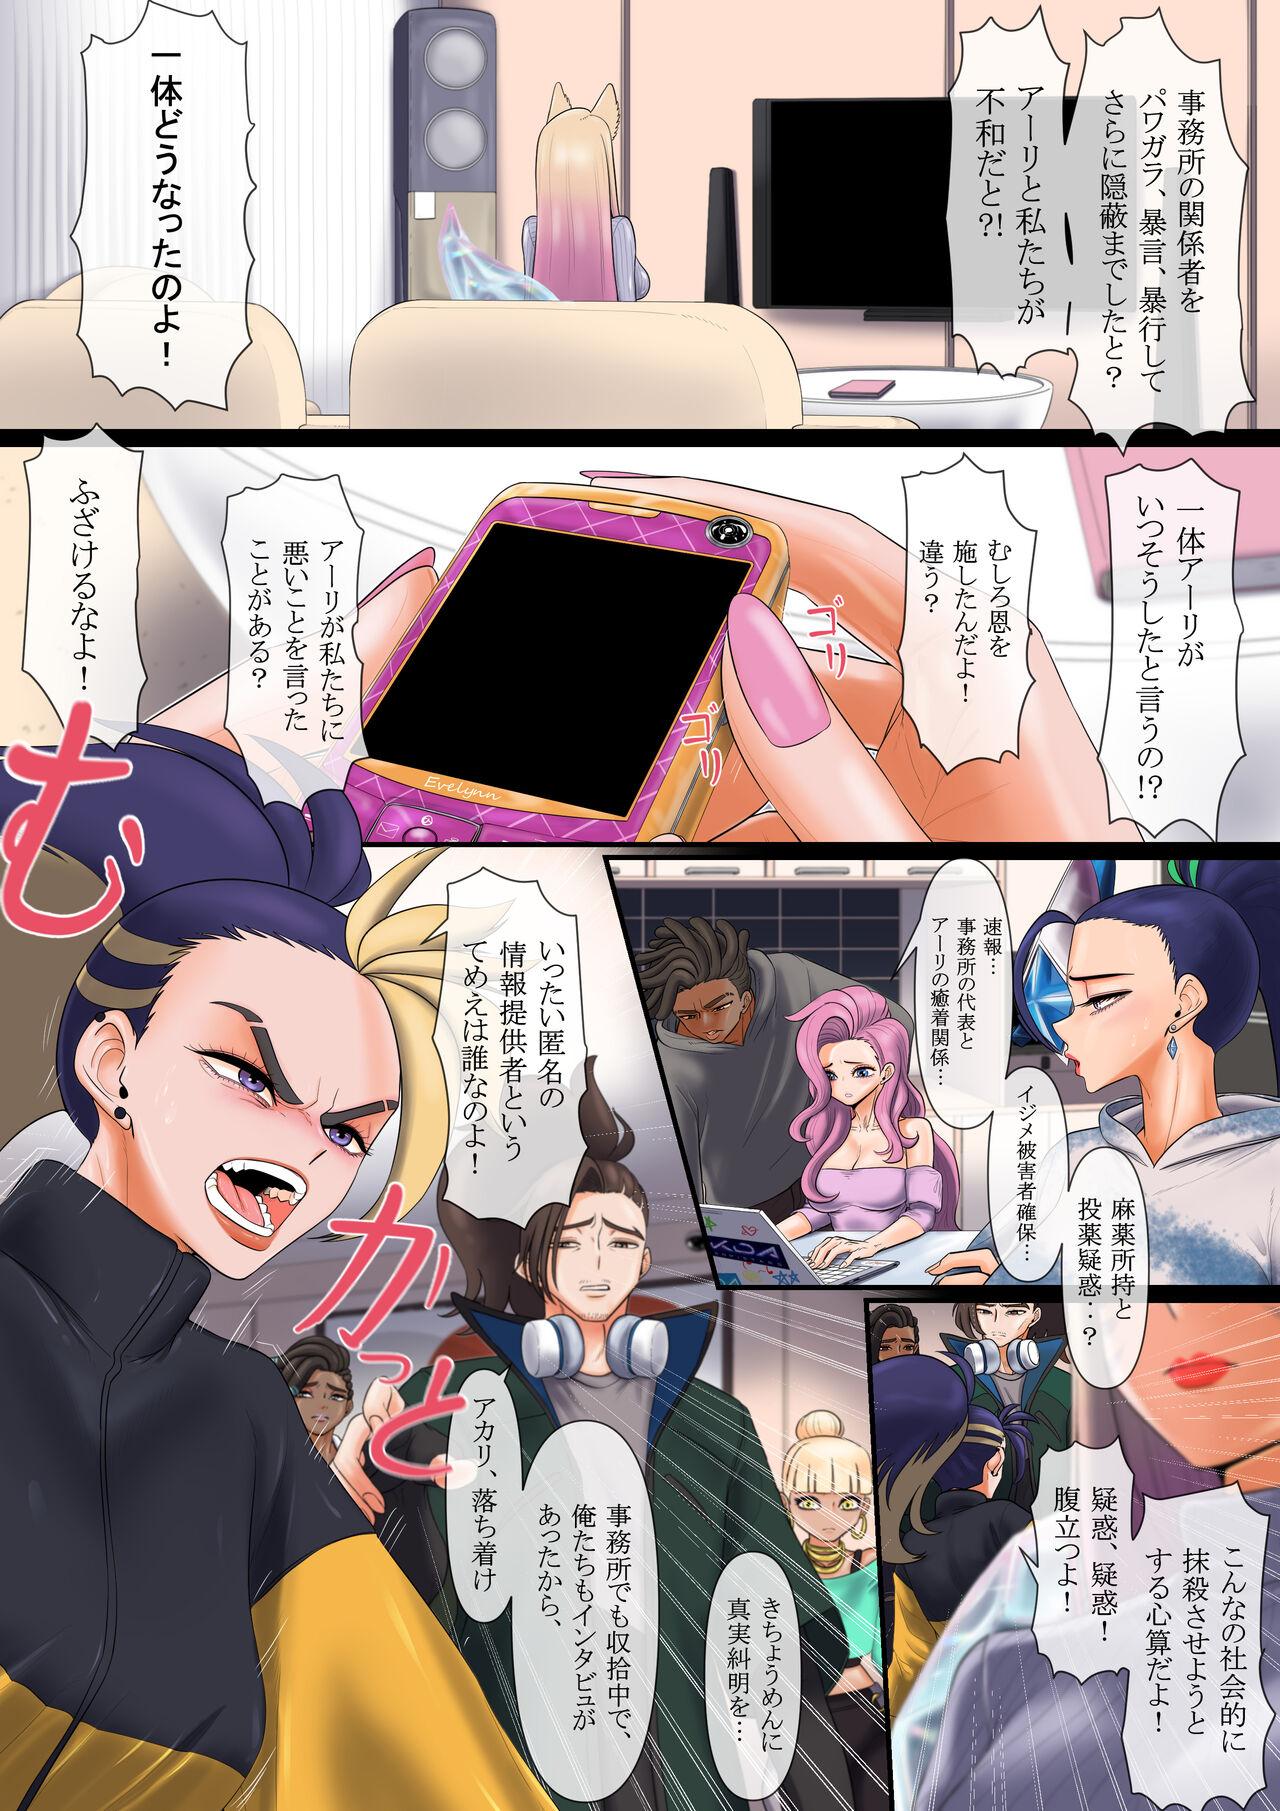 Milfsex 守りたいもの... - League of legends Close Up - Page 2